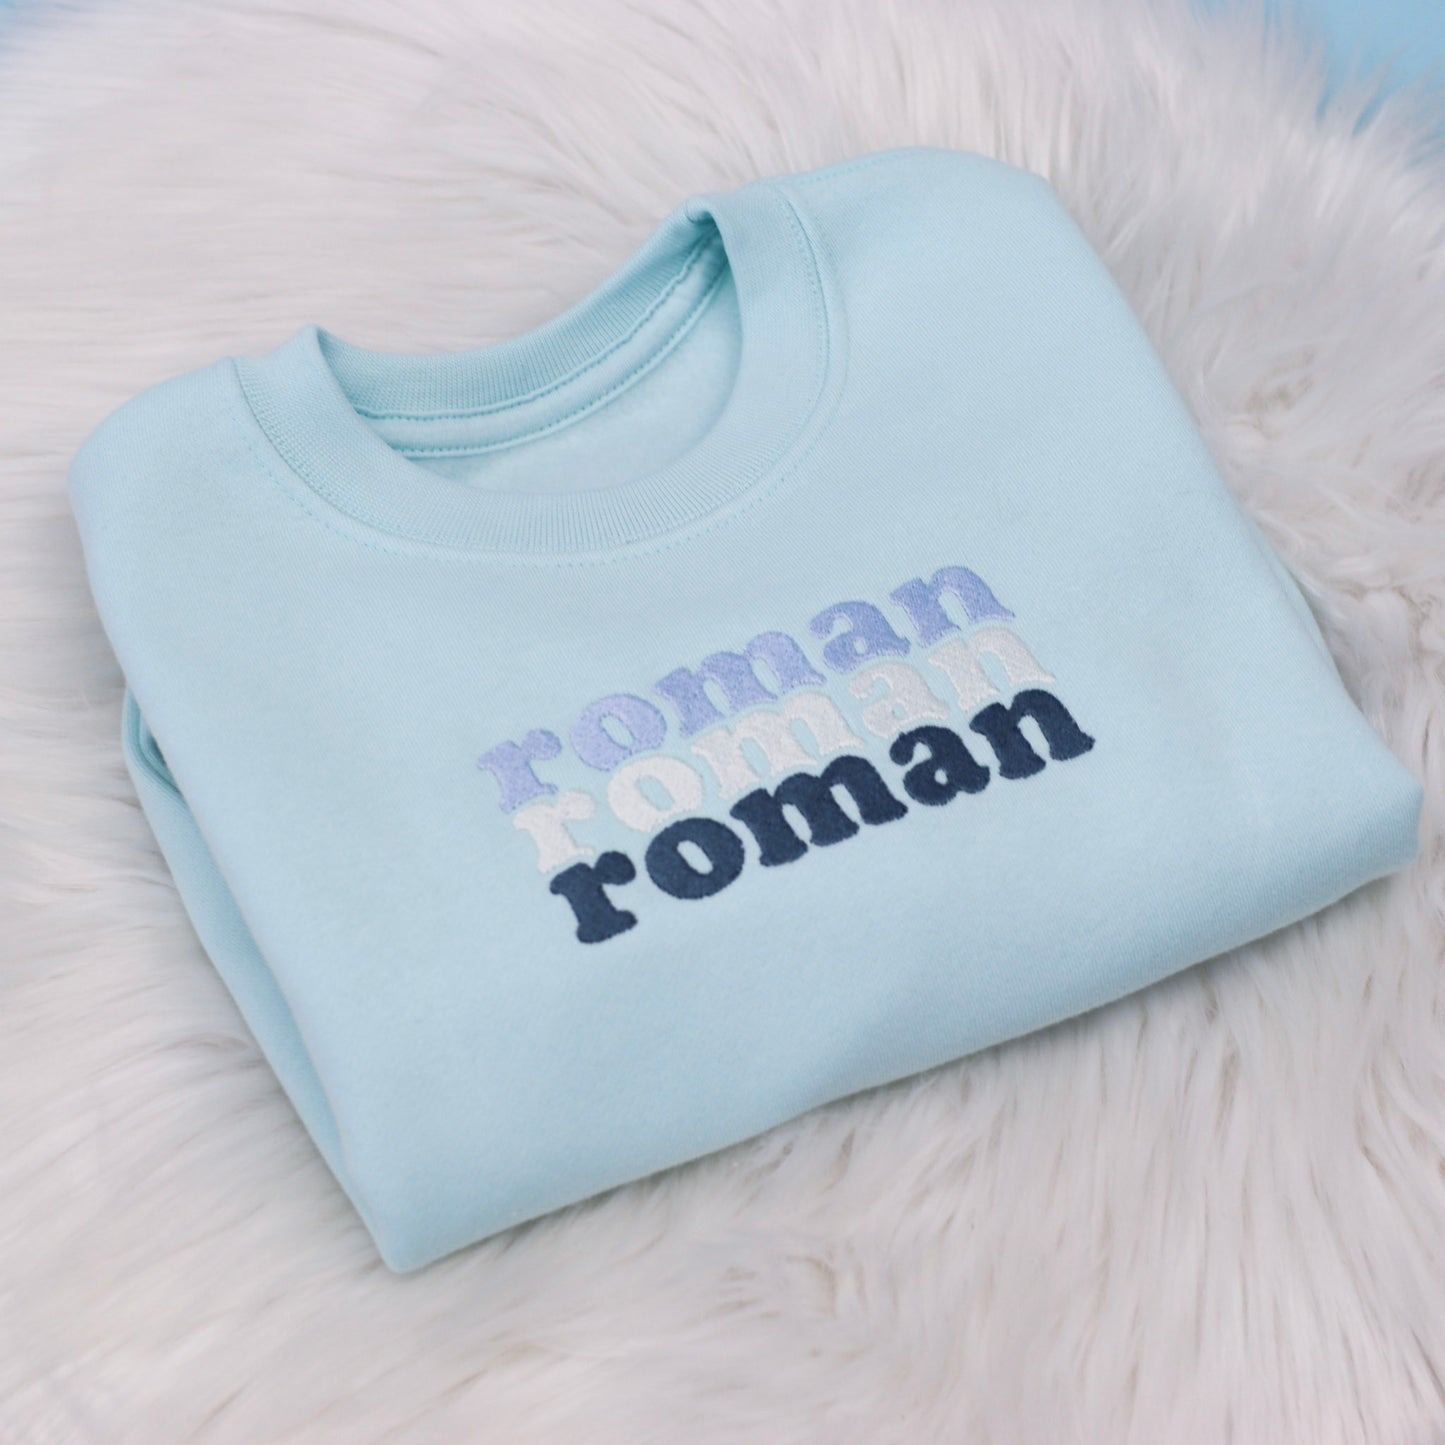 Pastel Blue Triple Name Embroidered Soft Style Sweatshirt